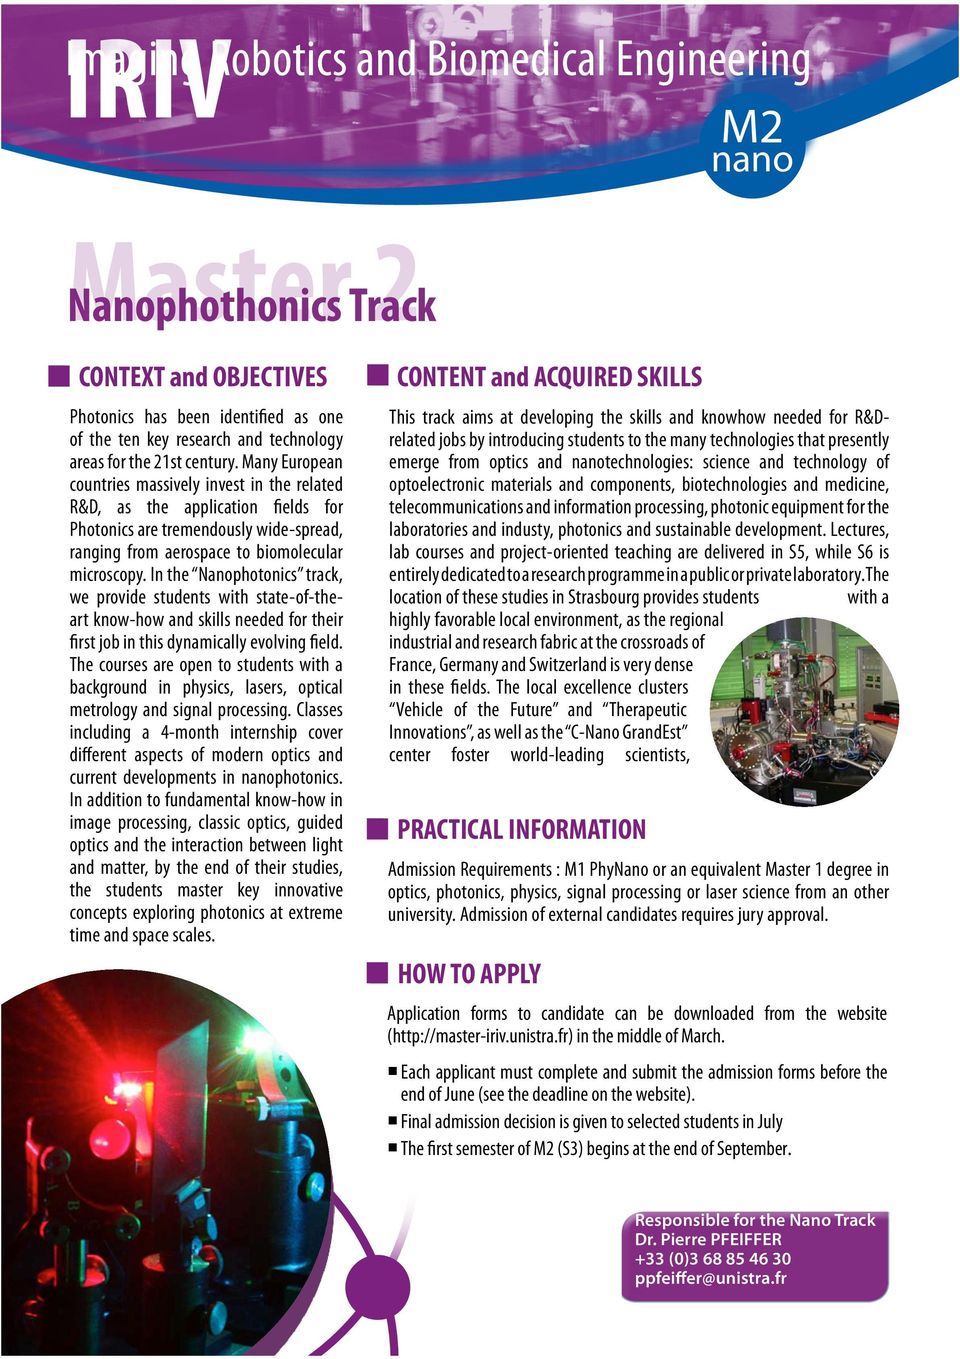 In the Nanophotonics track, we provide students with state-of-theart know-how and skills needed for their first job in this dynamically evolving field.